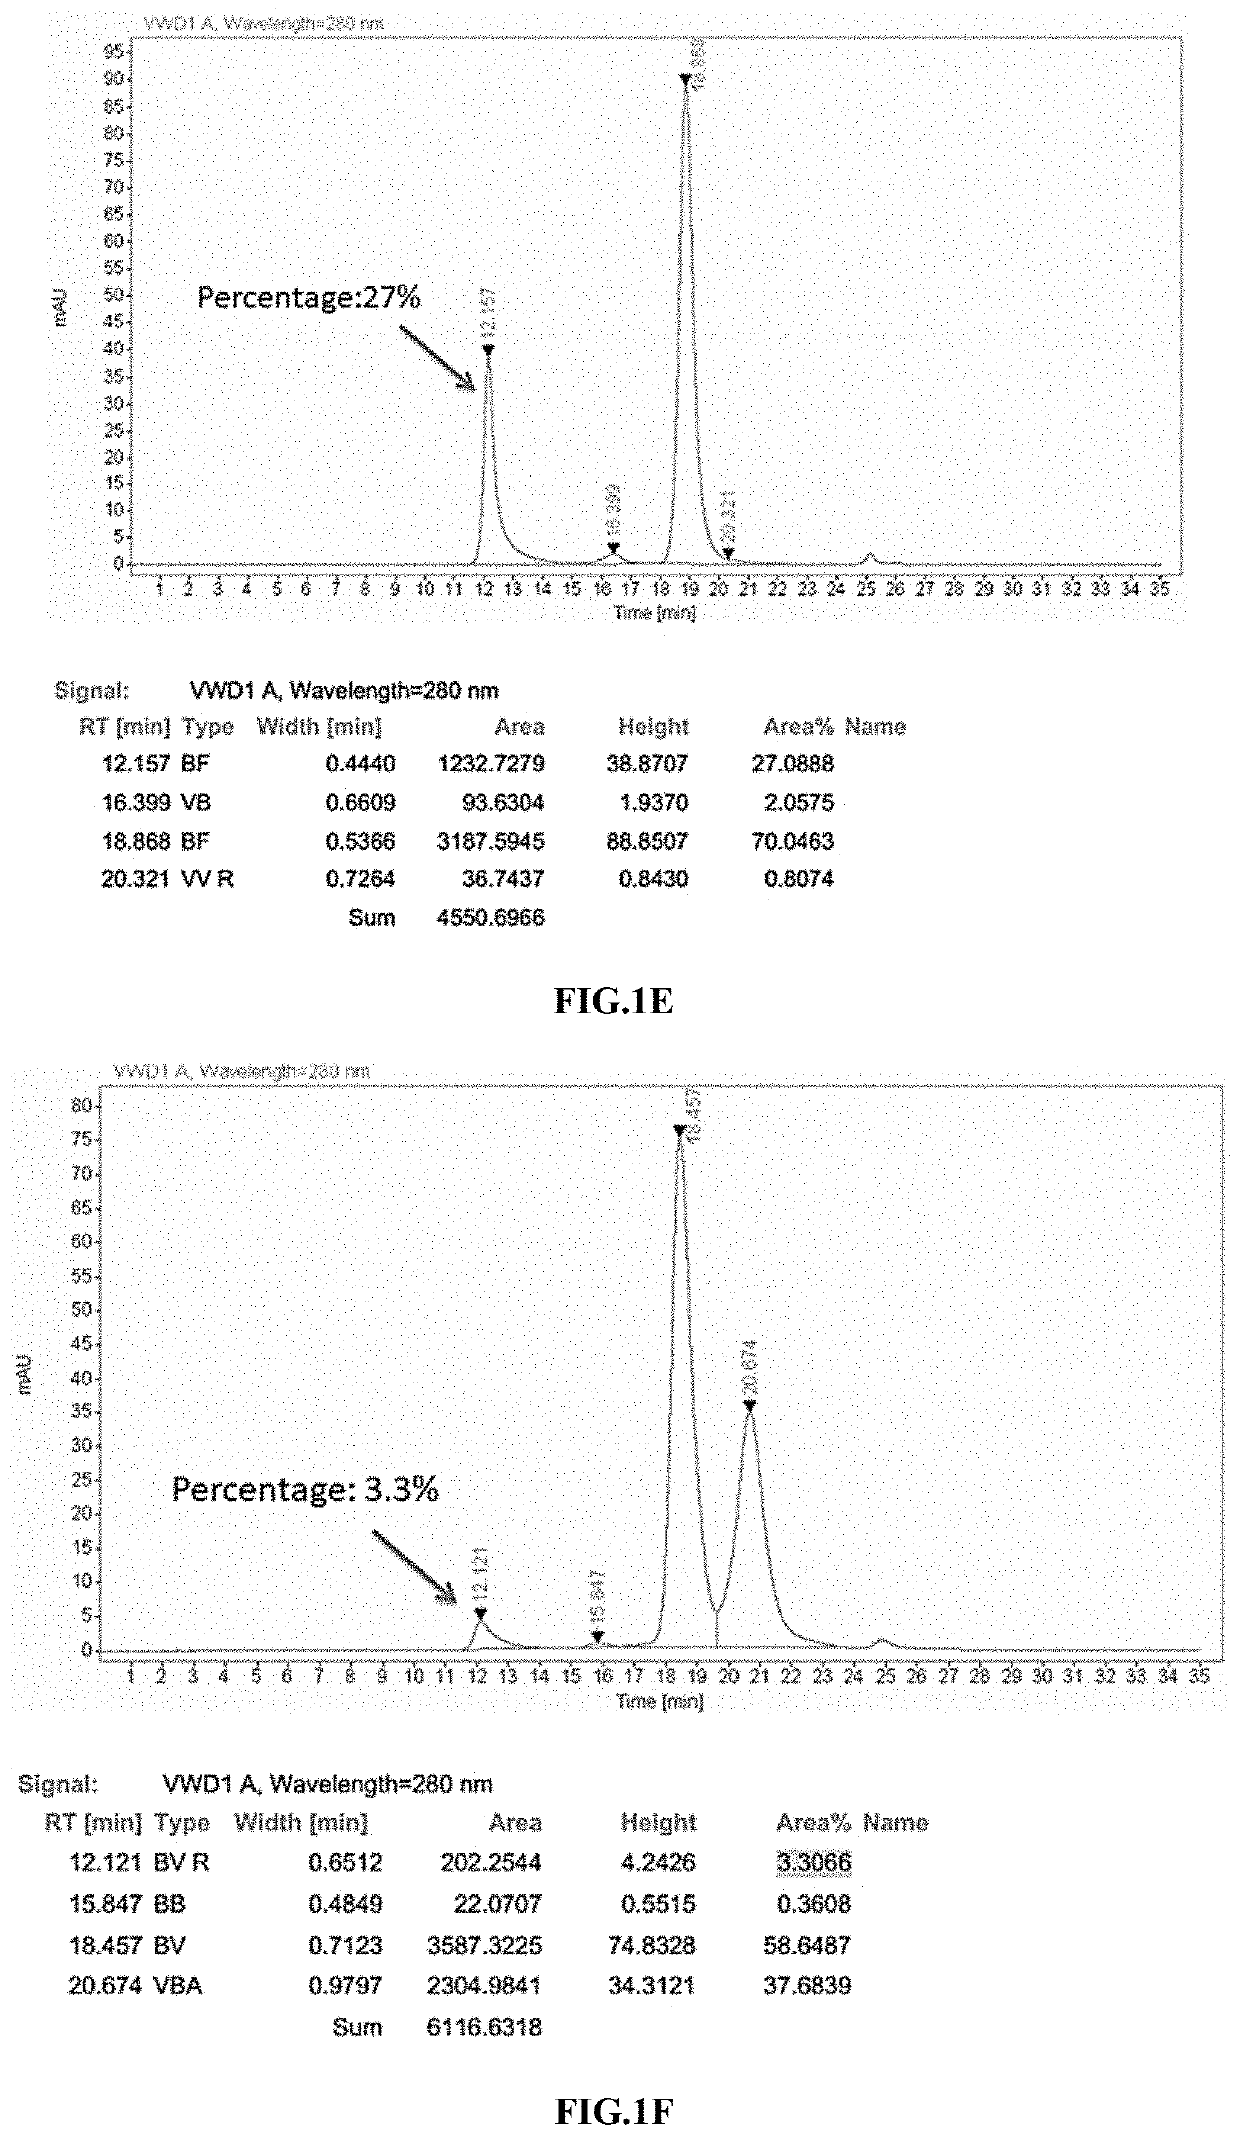 Methods and compositions for cancer treatment